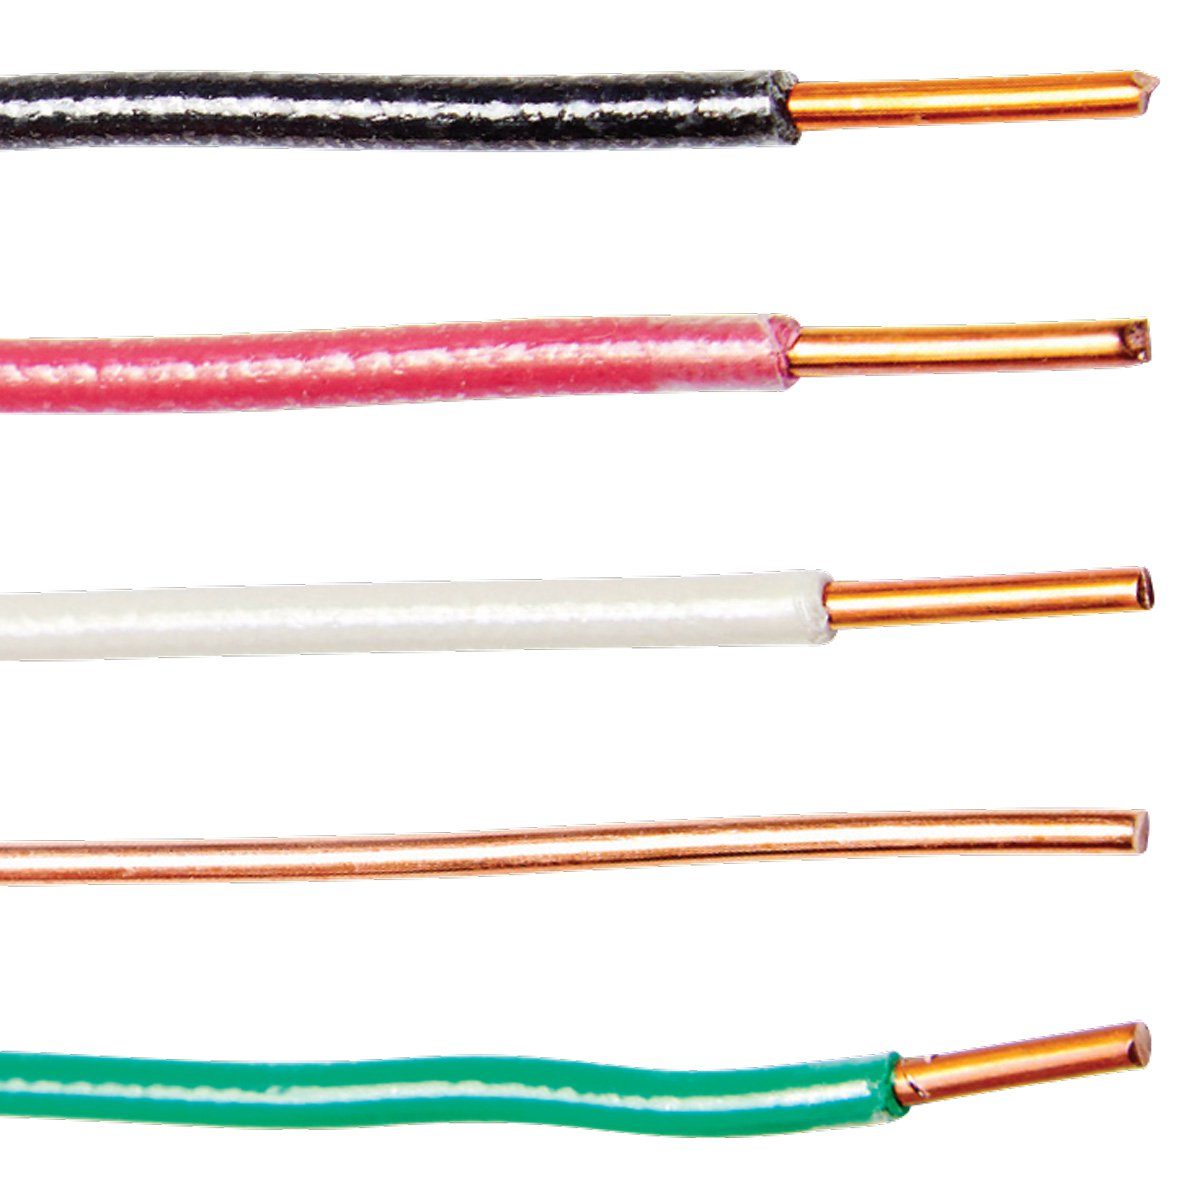 Electrical Wire and Cable Basics | Family Handyman